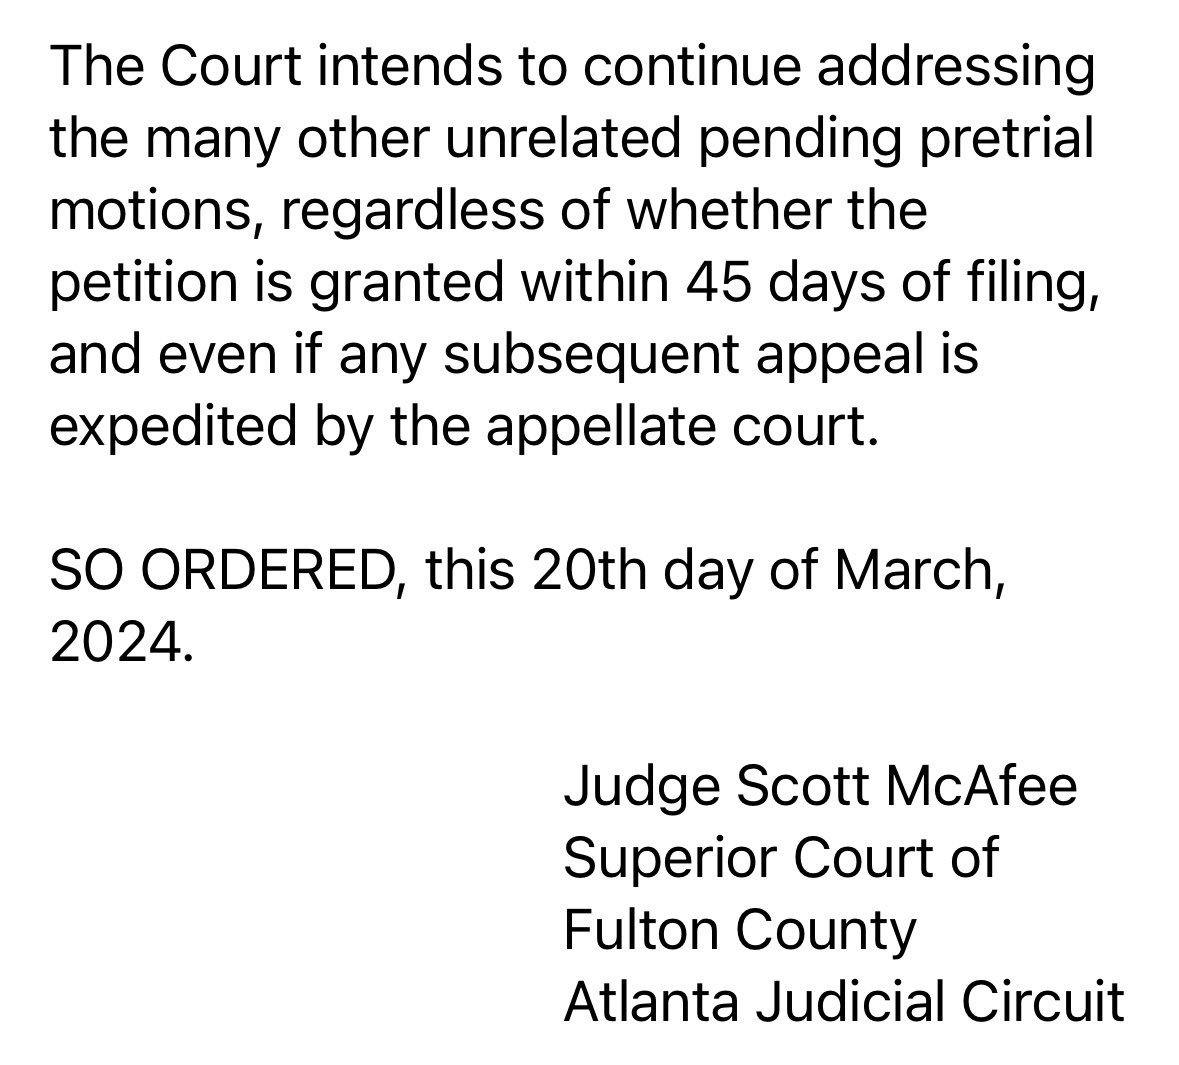 Yes, the Georgia Court of Appeals has agreed to review Judge McAfee’s ruling that DA Willis is not disqualified from the RICO prosecution of Trump & his co-conspirators. But recall, Judge McAfee said the case will keep moving forward EVEN IF the appeals court grants review.⬇️